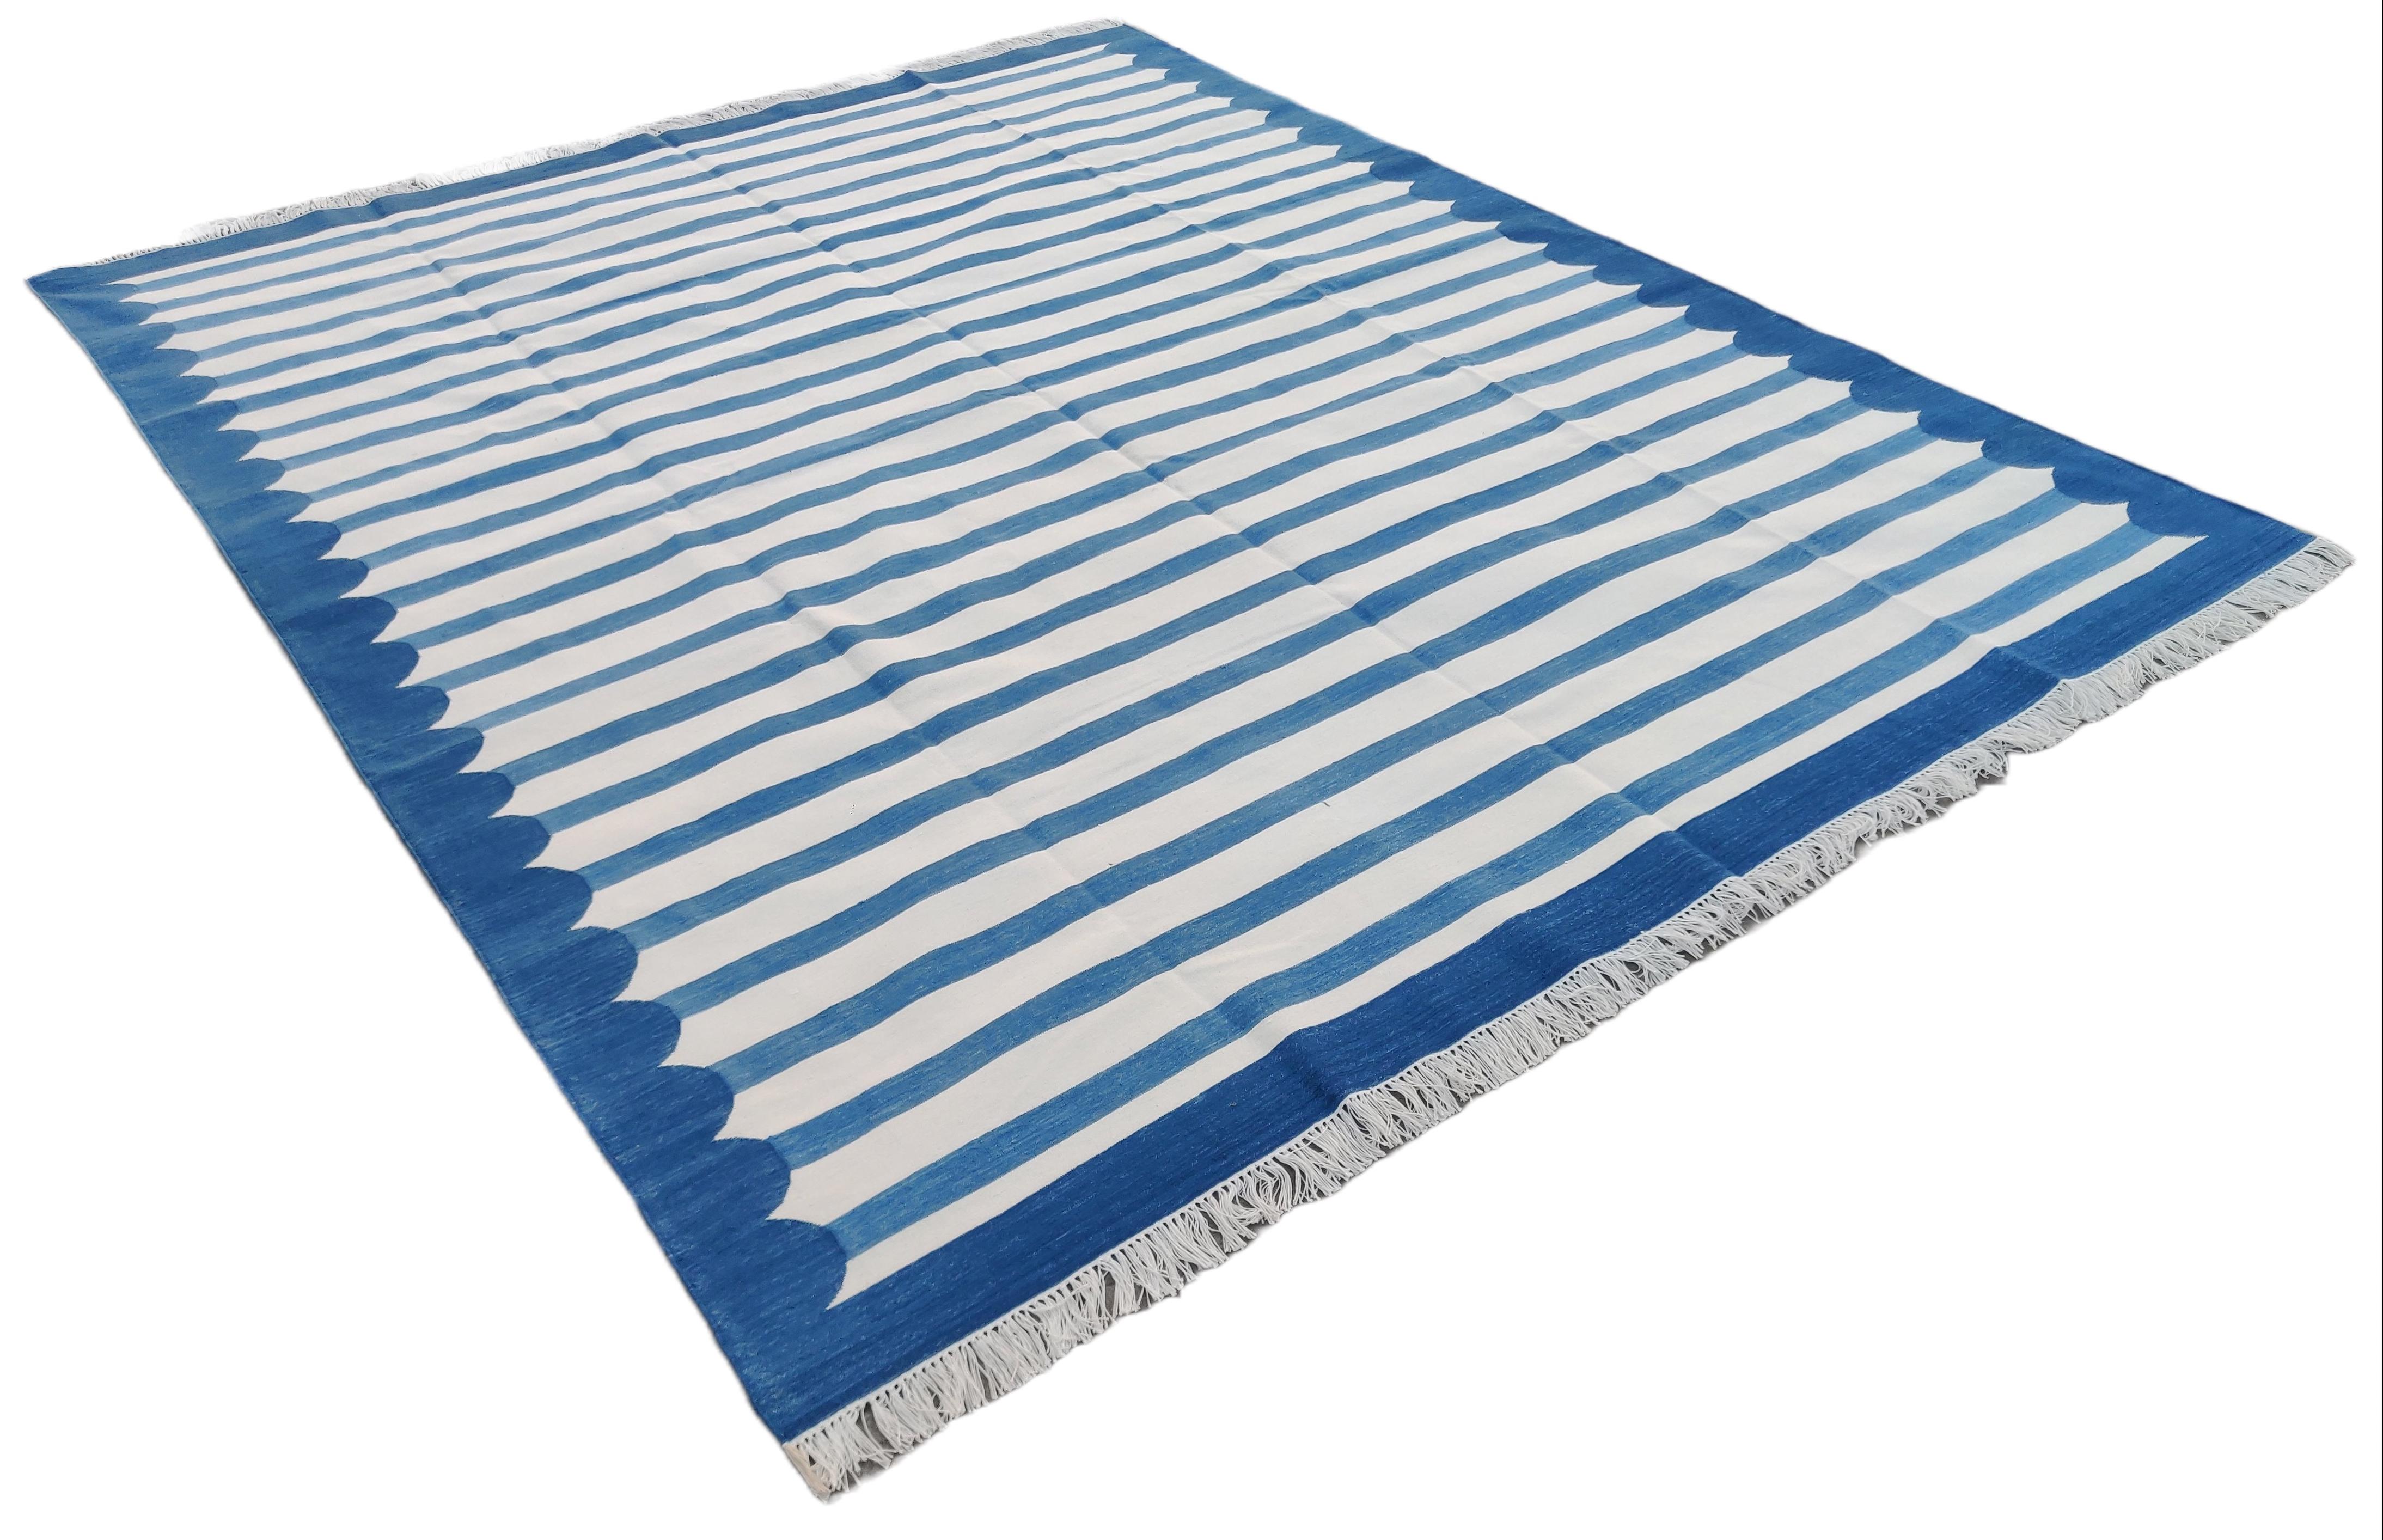 Cotton Natural Vegetable Dyed, Blue And White Striped Indian Rug - 8'x10'
These special flat-weave dhurries are hand-woven with 15 ply 100% cotton yarn. Due to the special manufacturing techniques used to create our rugs, the size and color of each